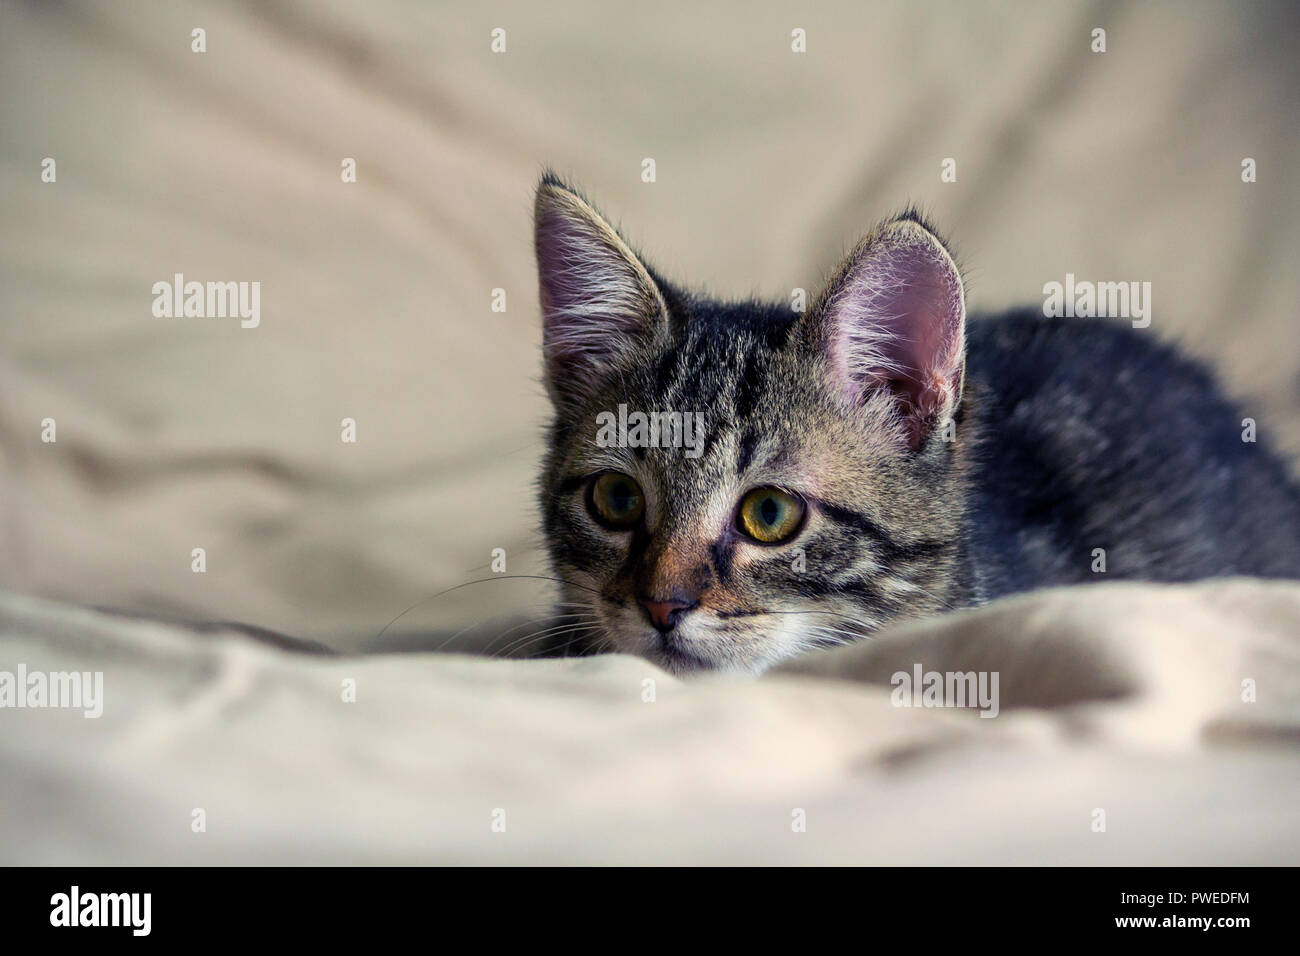 unbred tabby kitten lying on yellowish material, looking carefully to side, background similar material yellow shade, animal full-length lying, Stock Photo